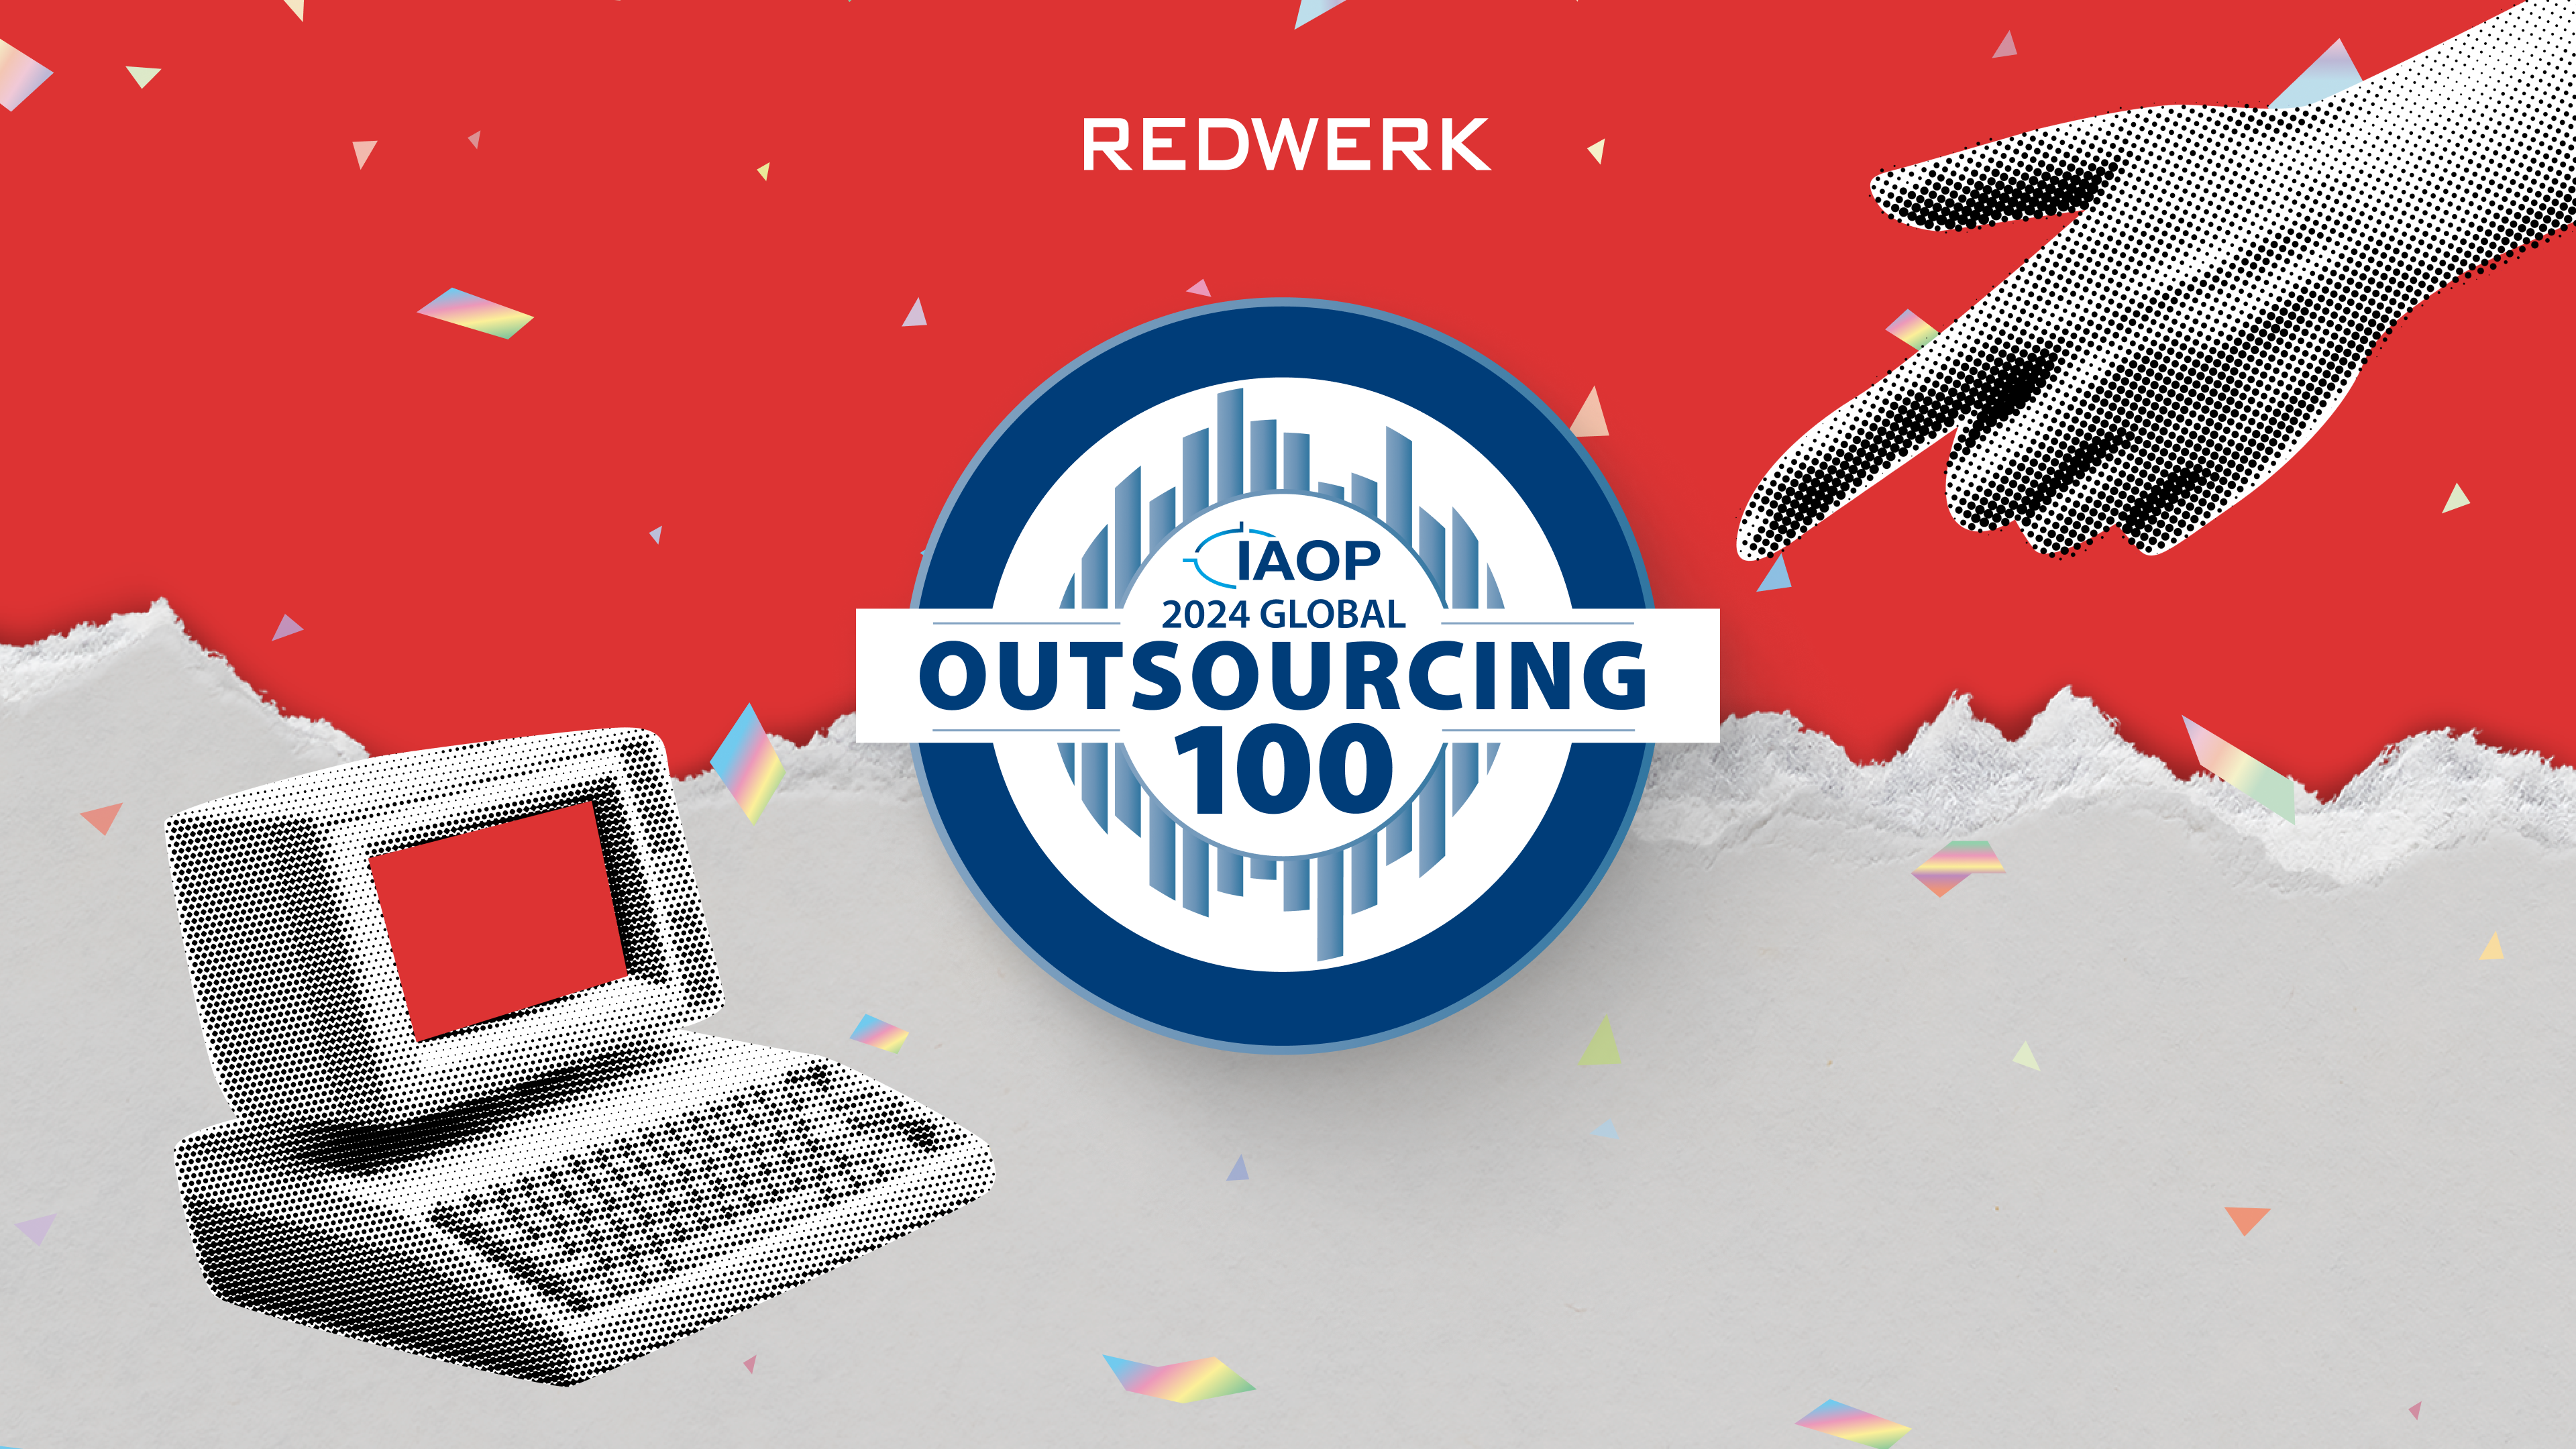 Redwerk Honored with IAOP Global Outsourcing 100 Award for 2024